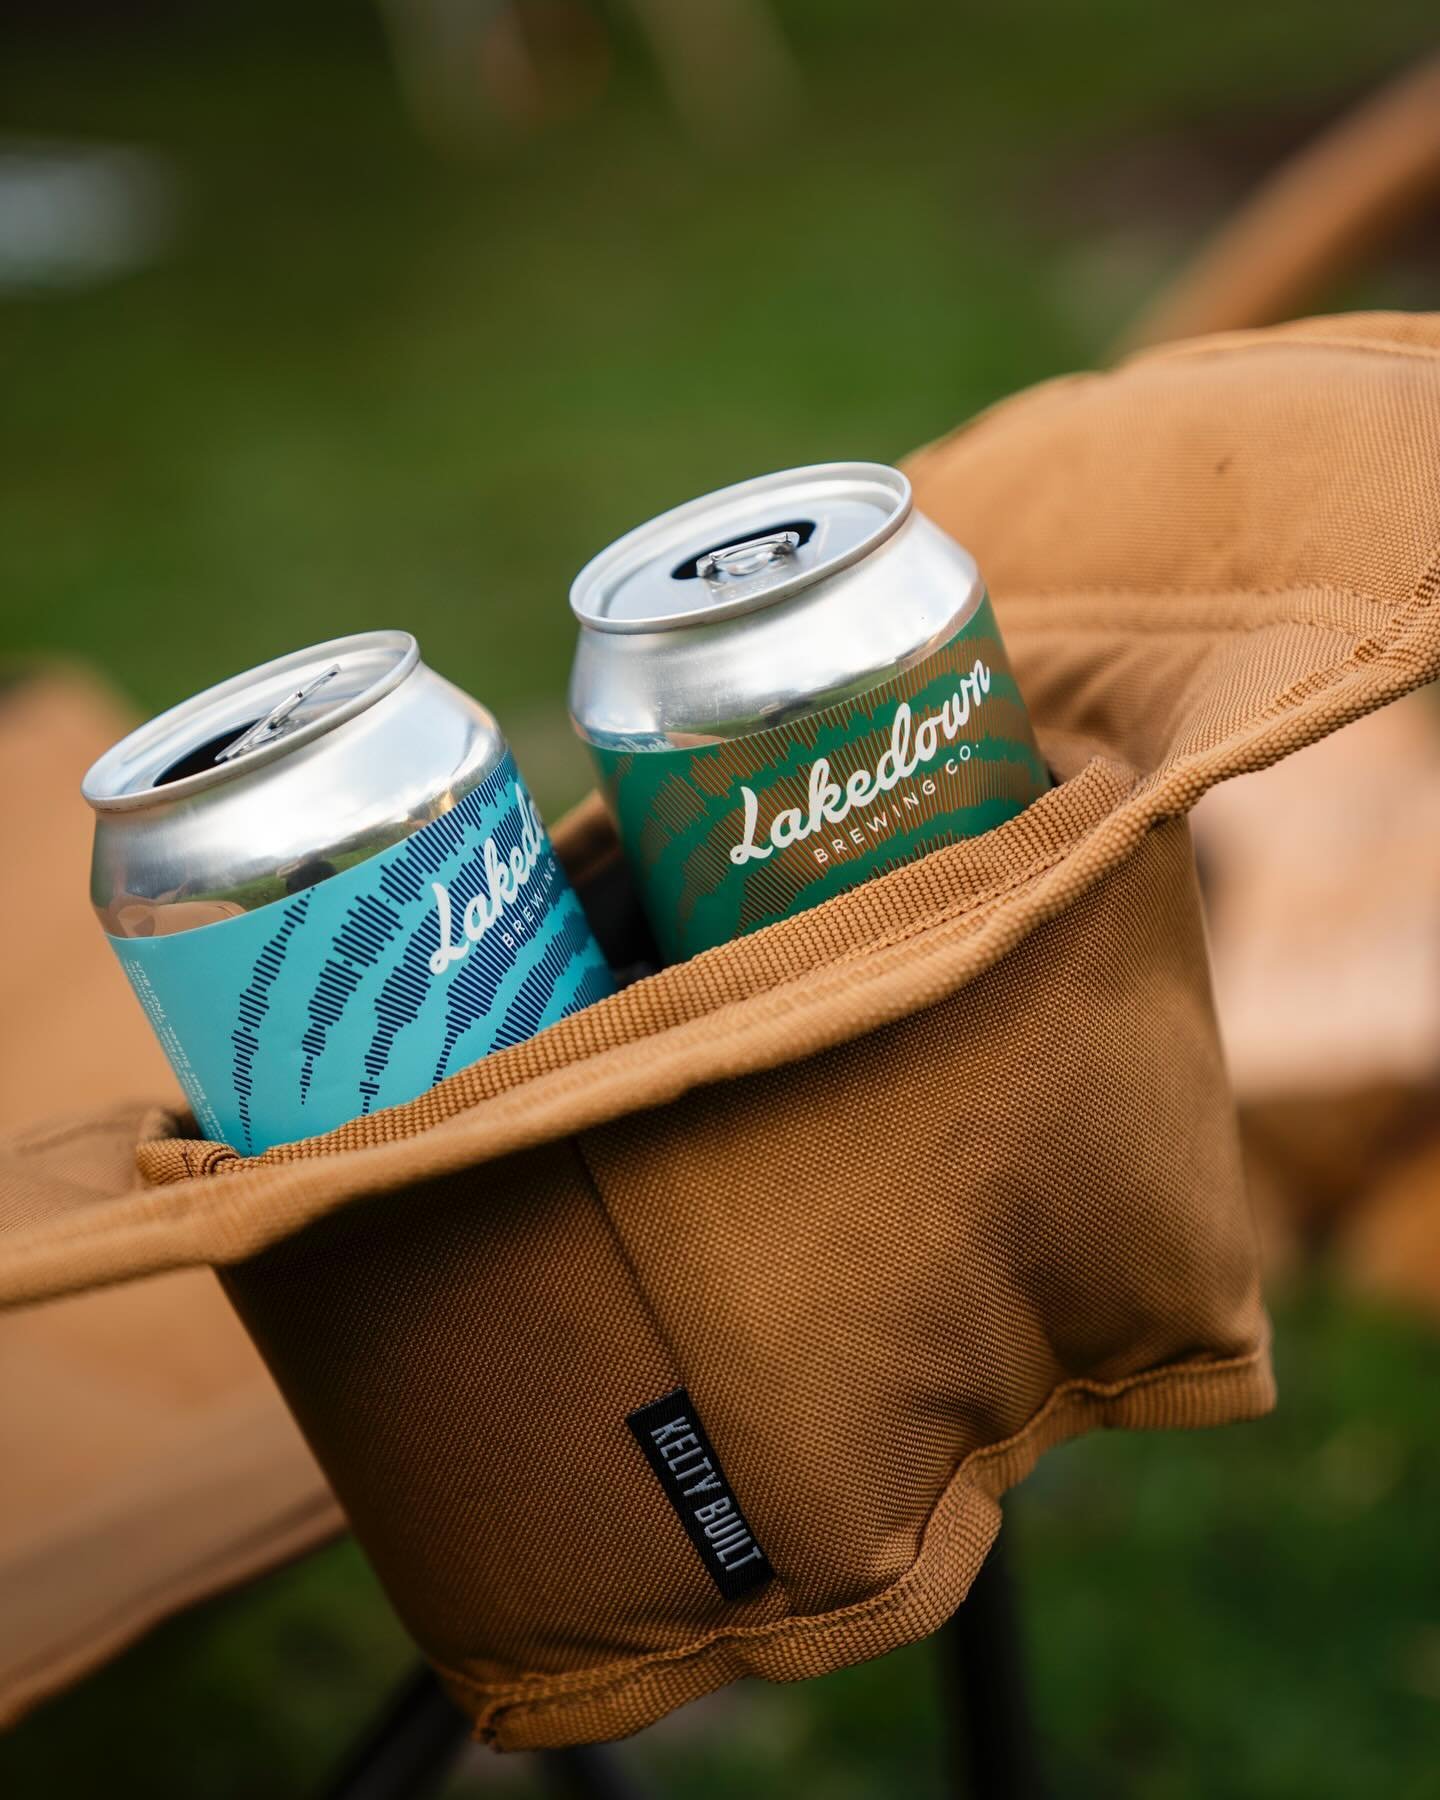 A crisp cold one with a pizza in the mountains. 🏔️ I can&rsquo;t think of a better combination. 
@lakedownbrewingco really hit the spot! Delicious and meticulously brewed, using their innovative filtration system to create these crisp tailored flavo